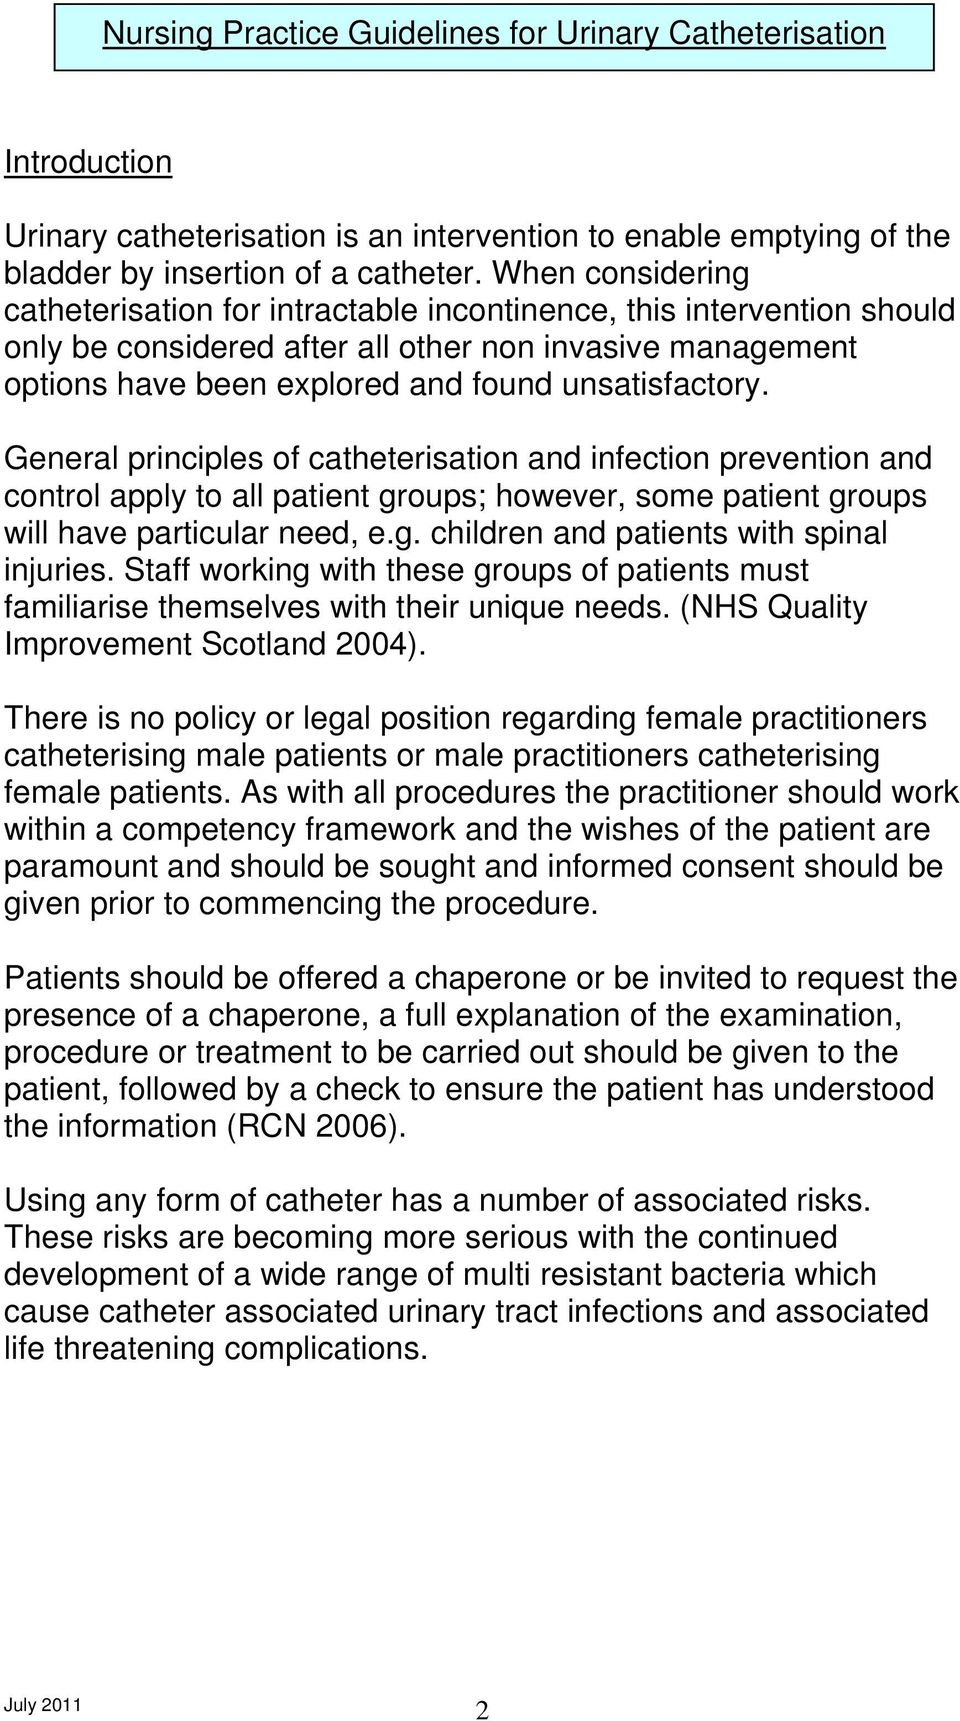 General principles of catheterisation and infection prevention and control apply to all patient groups; however, some patient groups will have particular need, e.g. children and patients with spinal injuries.